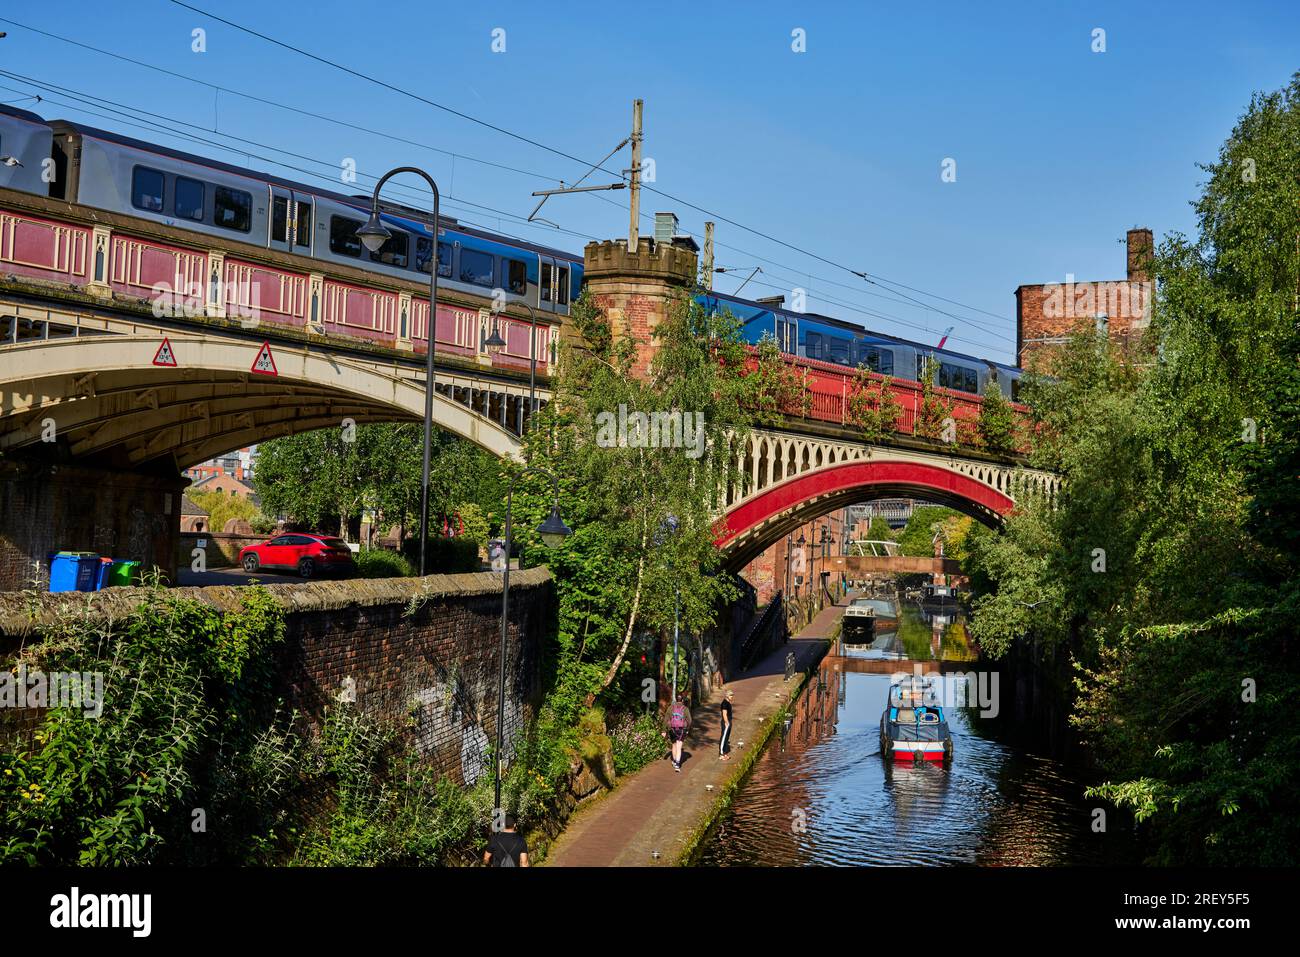 Manchester city centre and the Rochdale Canal in the Deansgate Locks area near Castlefield Stock Photo